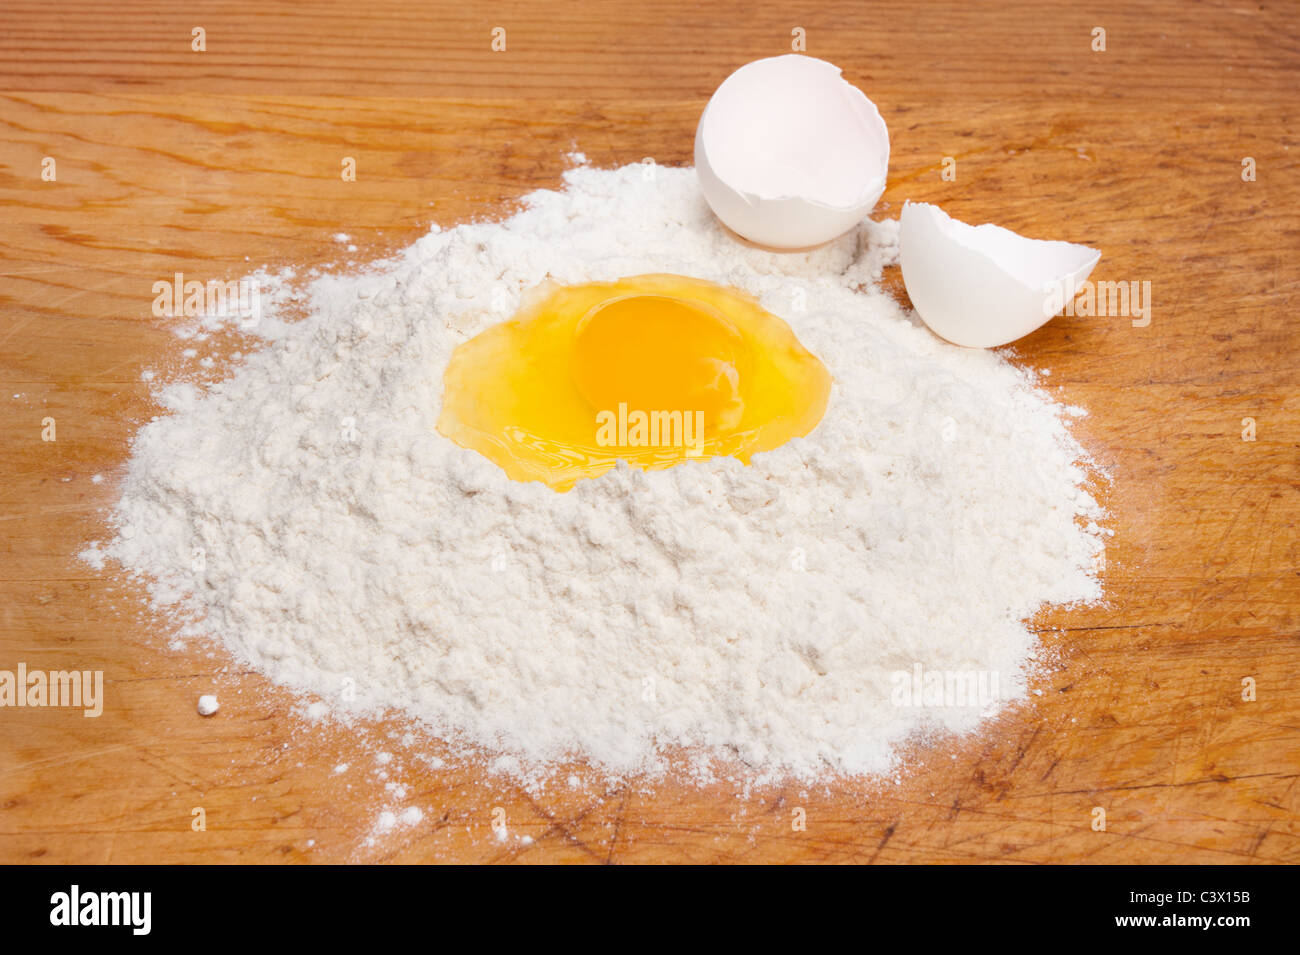 A single egg yolk in a bed of cooking flour. Stock Photo